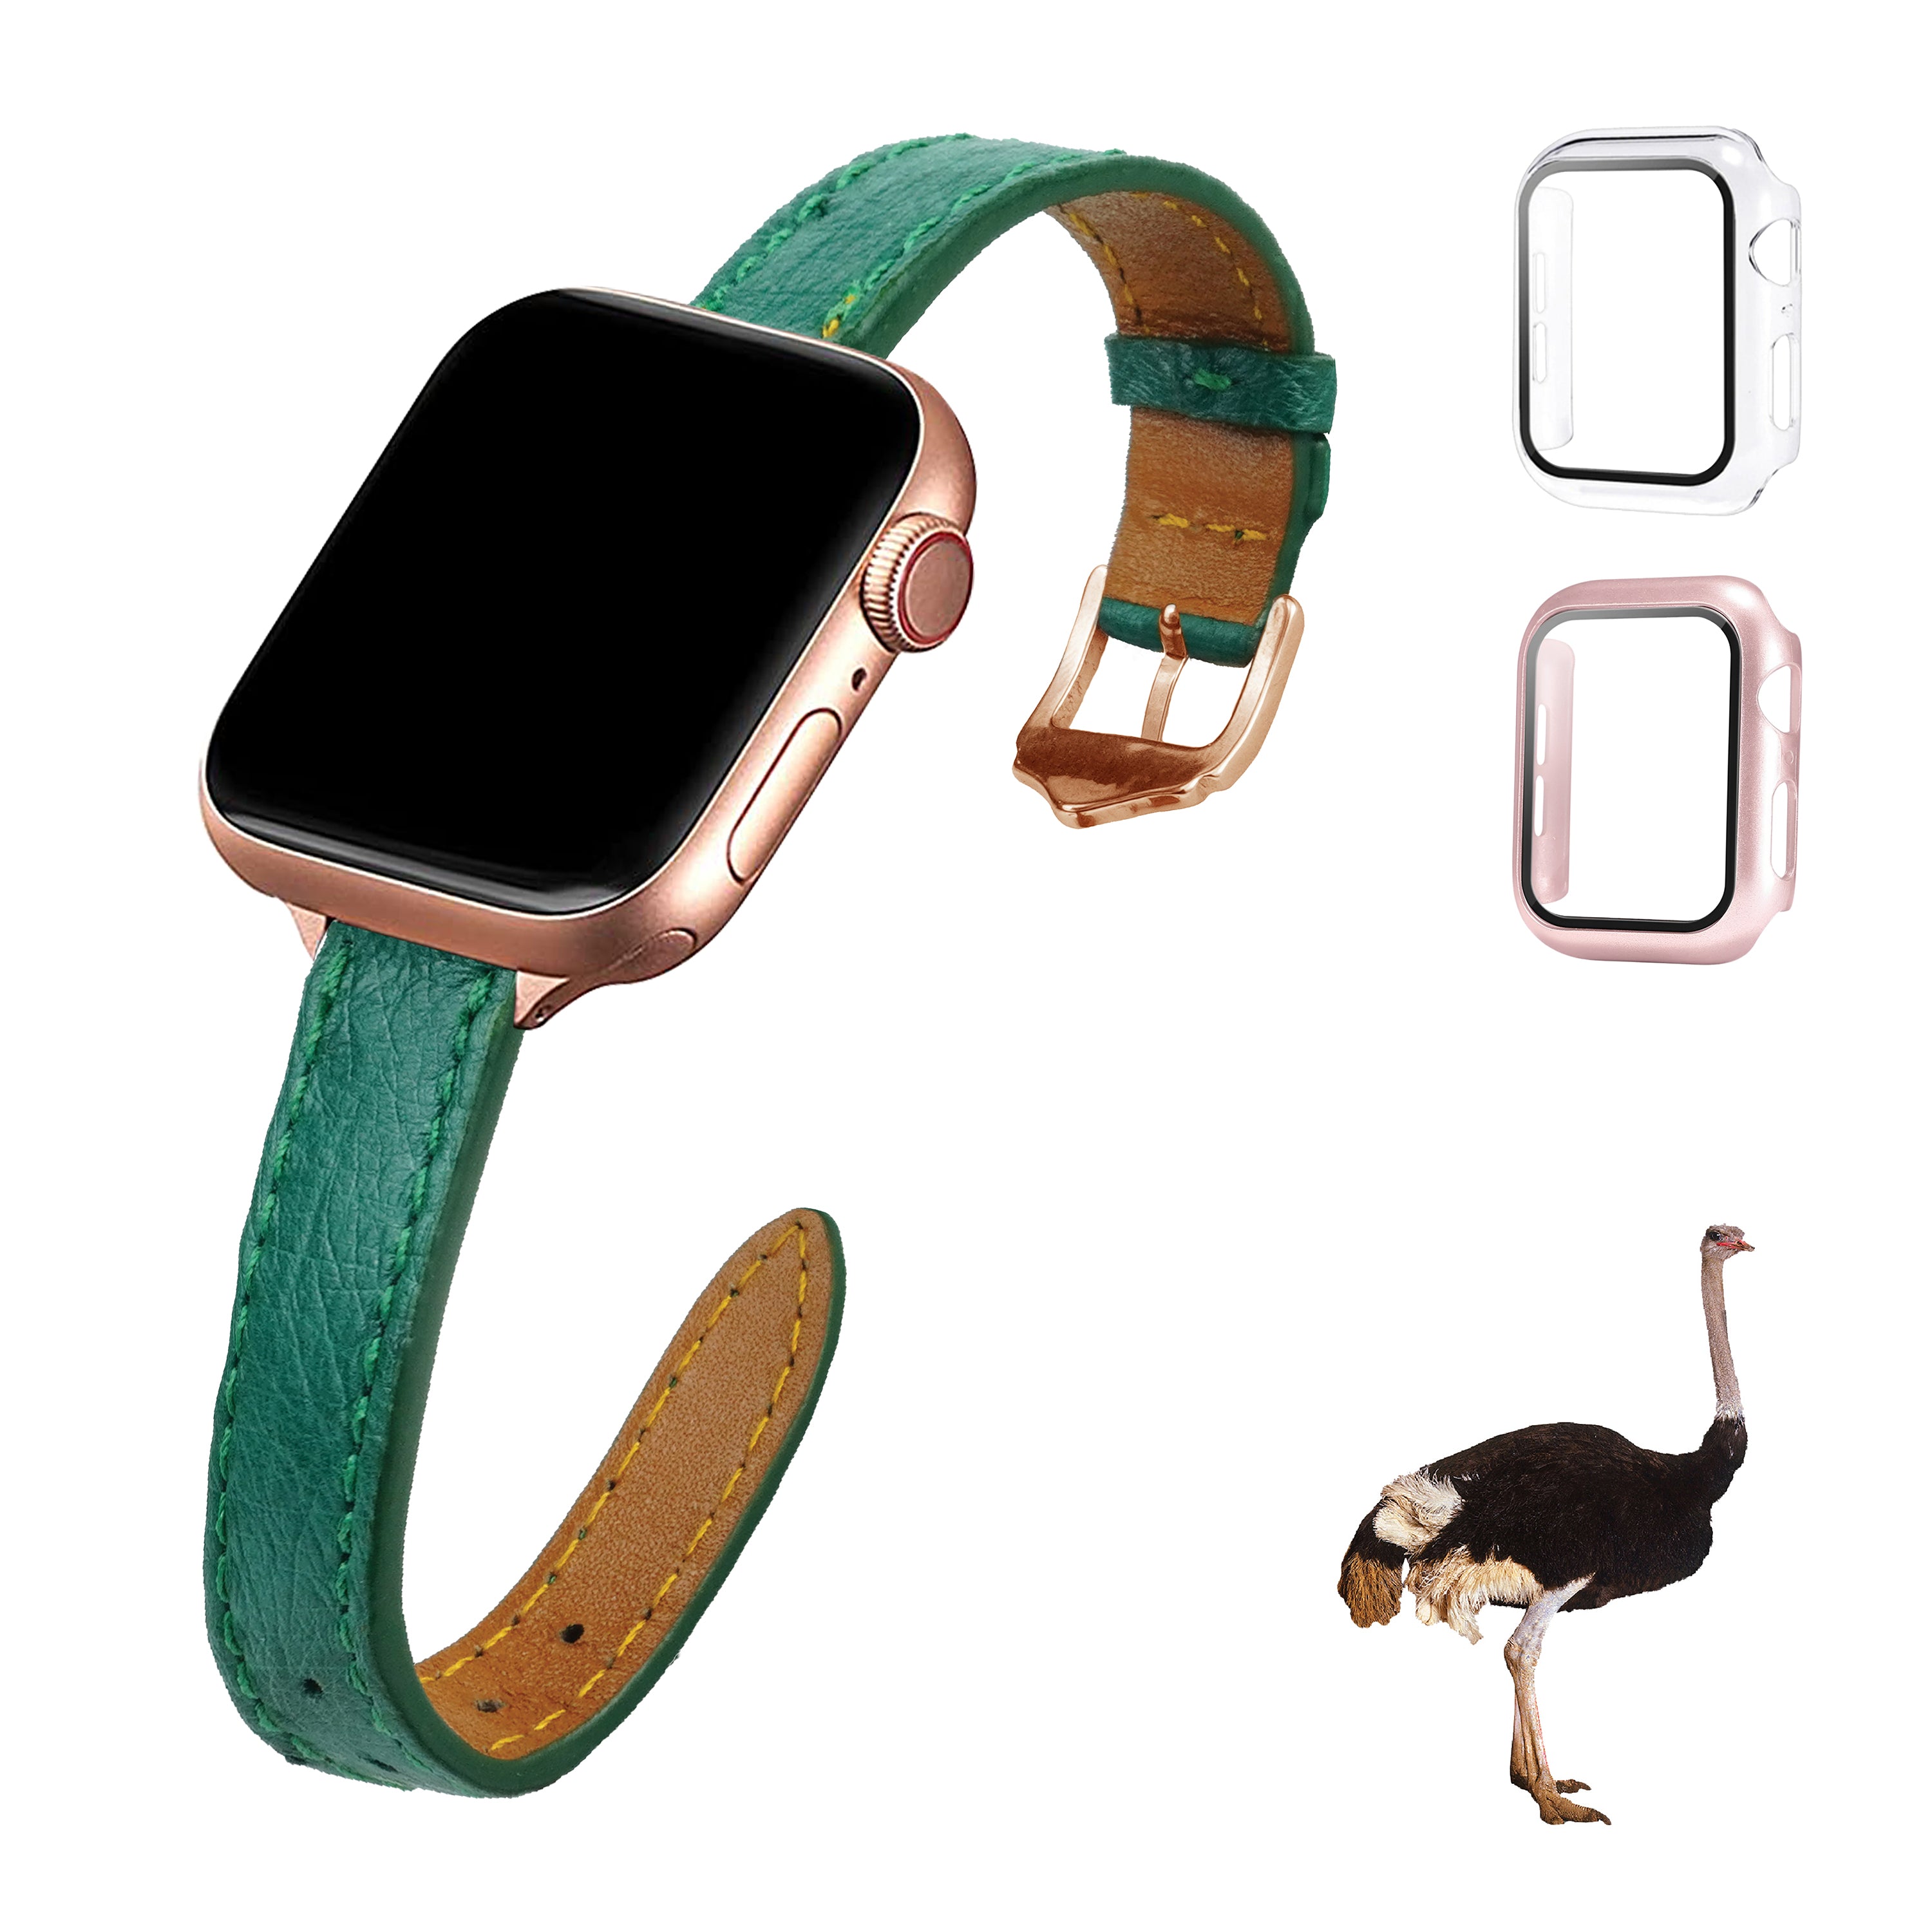 Green Flat Ostrich Leather Band Compatible Apple Watch Iwatch 42mm Screen Protector Case Gold Adapter Replacement Strap For Smartwatch Series 1 2 3 Leather Handmade AW-188G-W-42MM